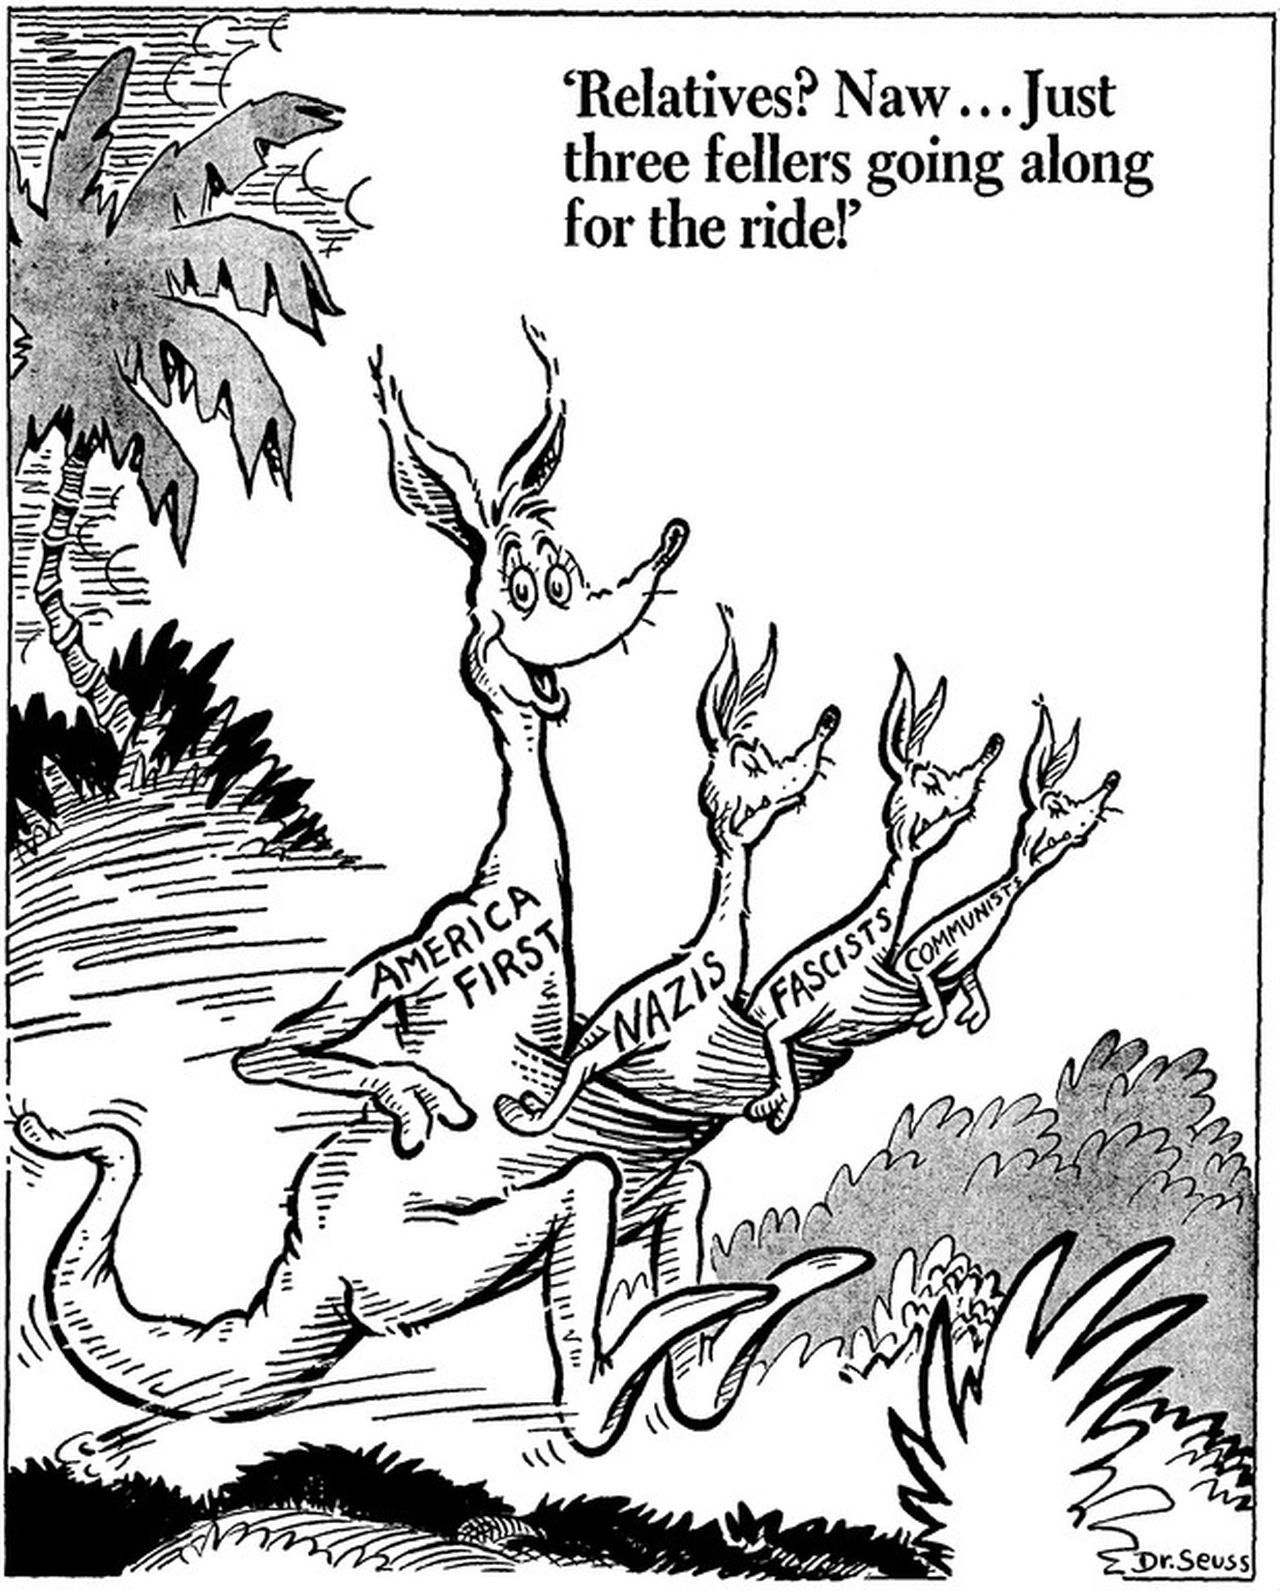 Dr. Seuss on America First 2